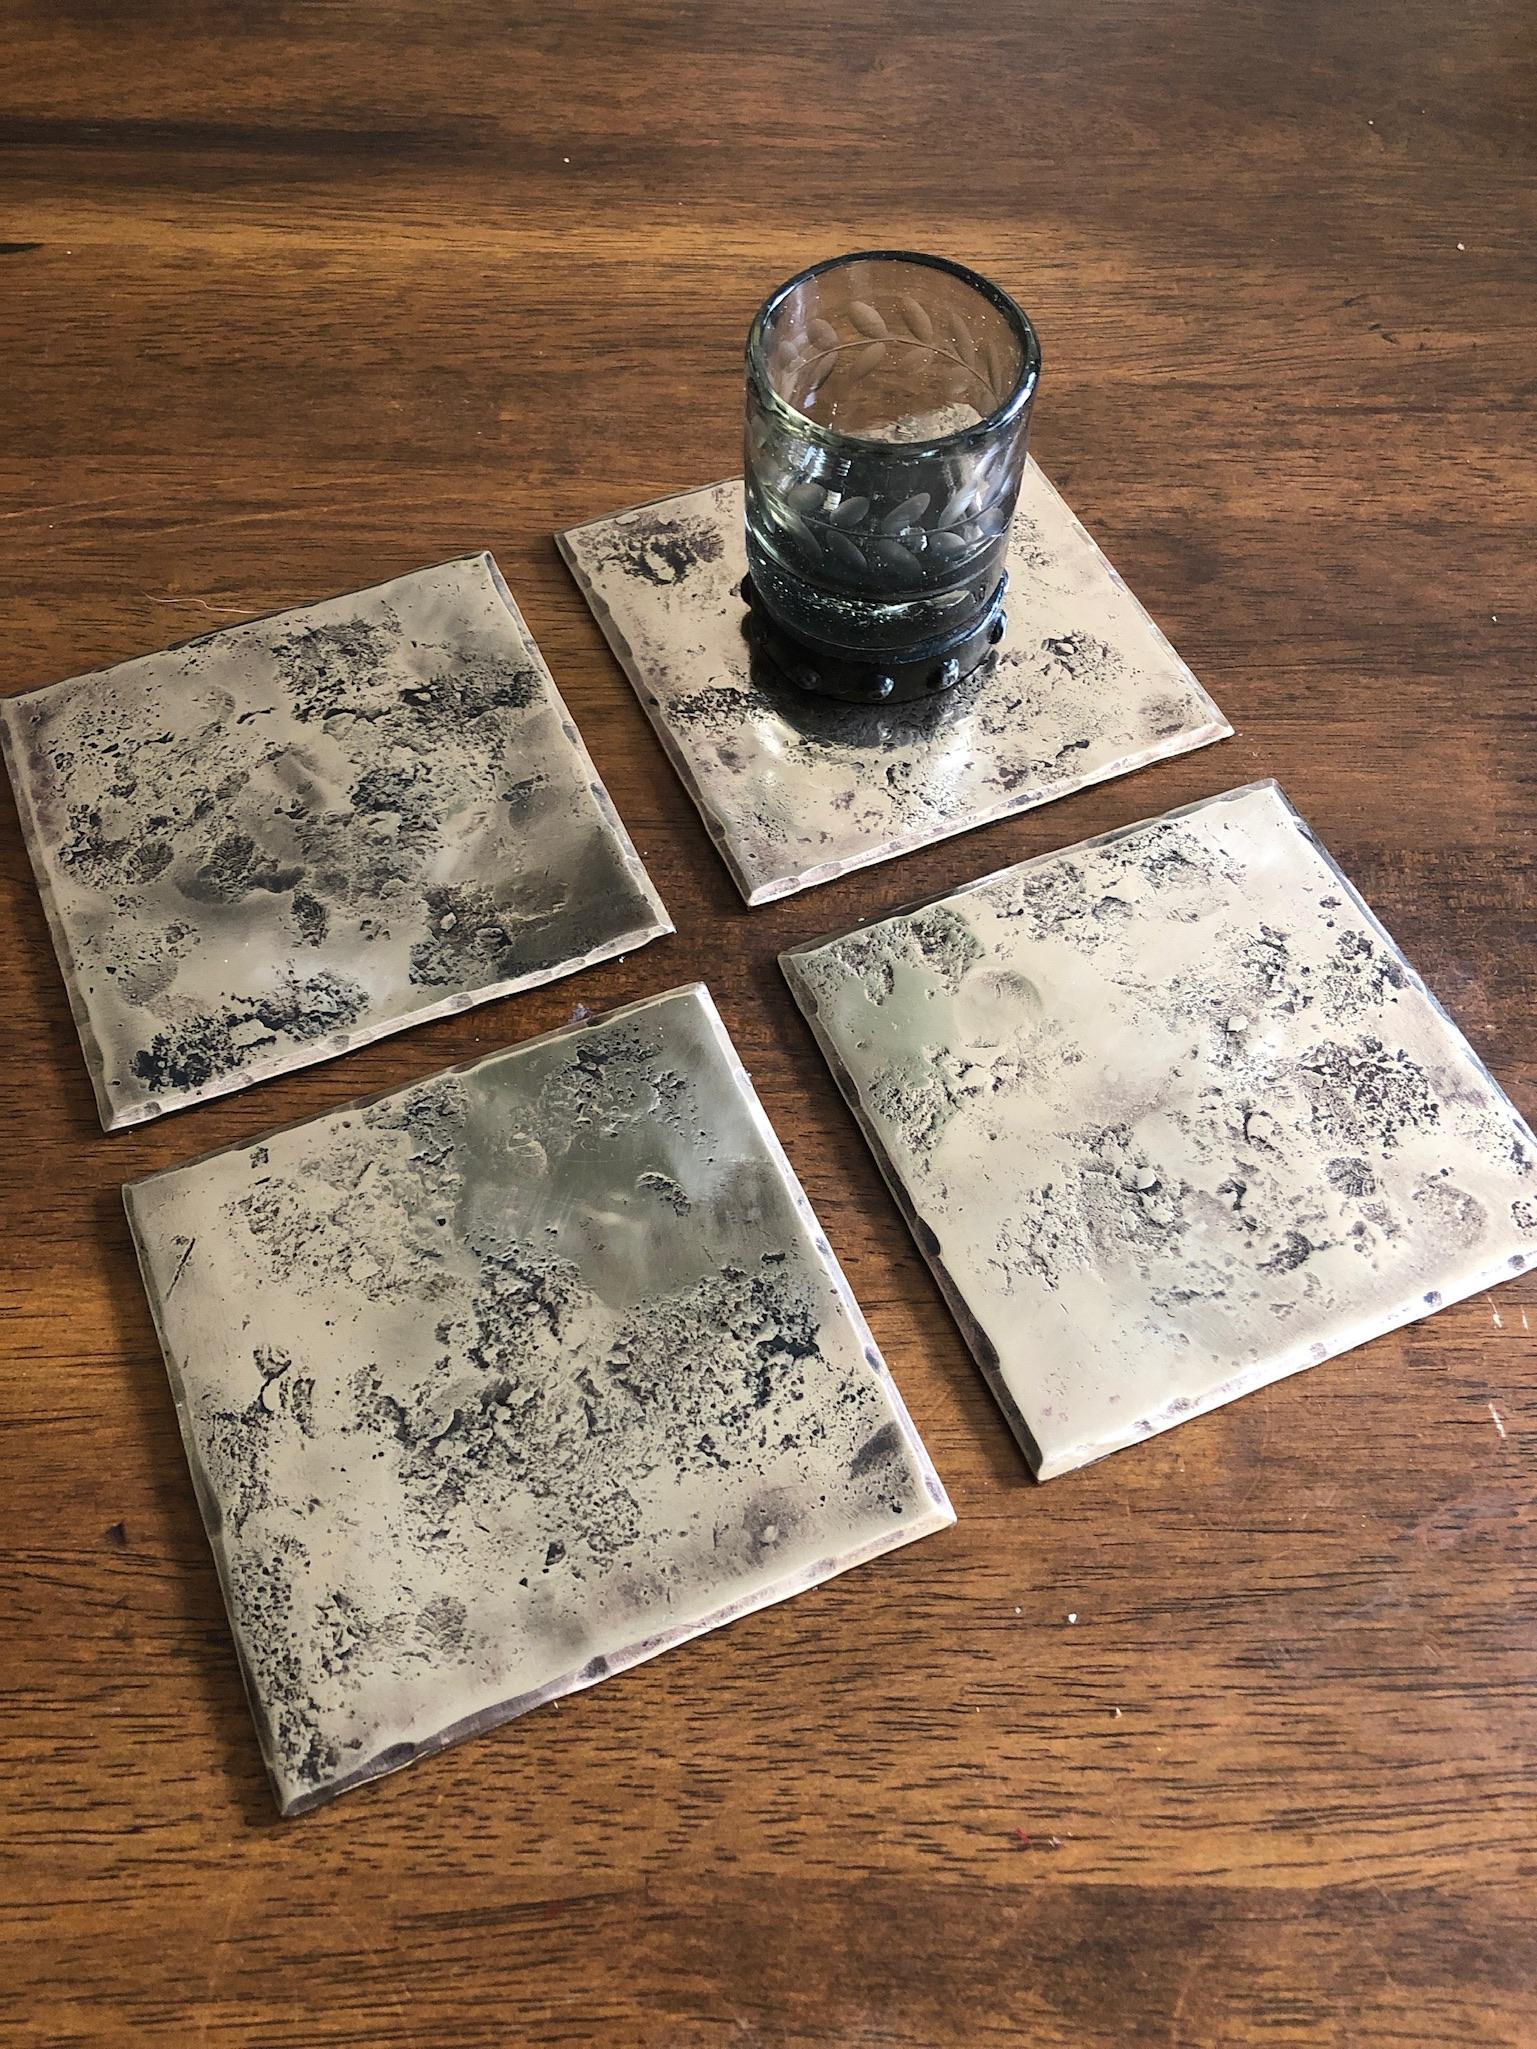 A handcrafted, square coaster made from bronze that has been forge textured over a rough steel anvil face to provide texture. The edges are hammered and beveled. The bronze is burnished to accentuate the forged details. A glossy clear coat enhances